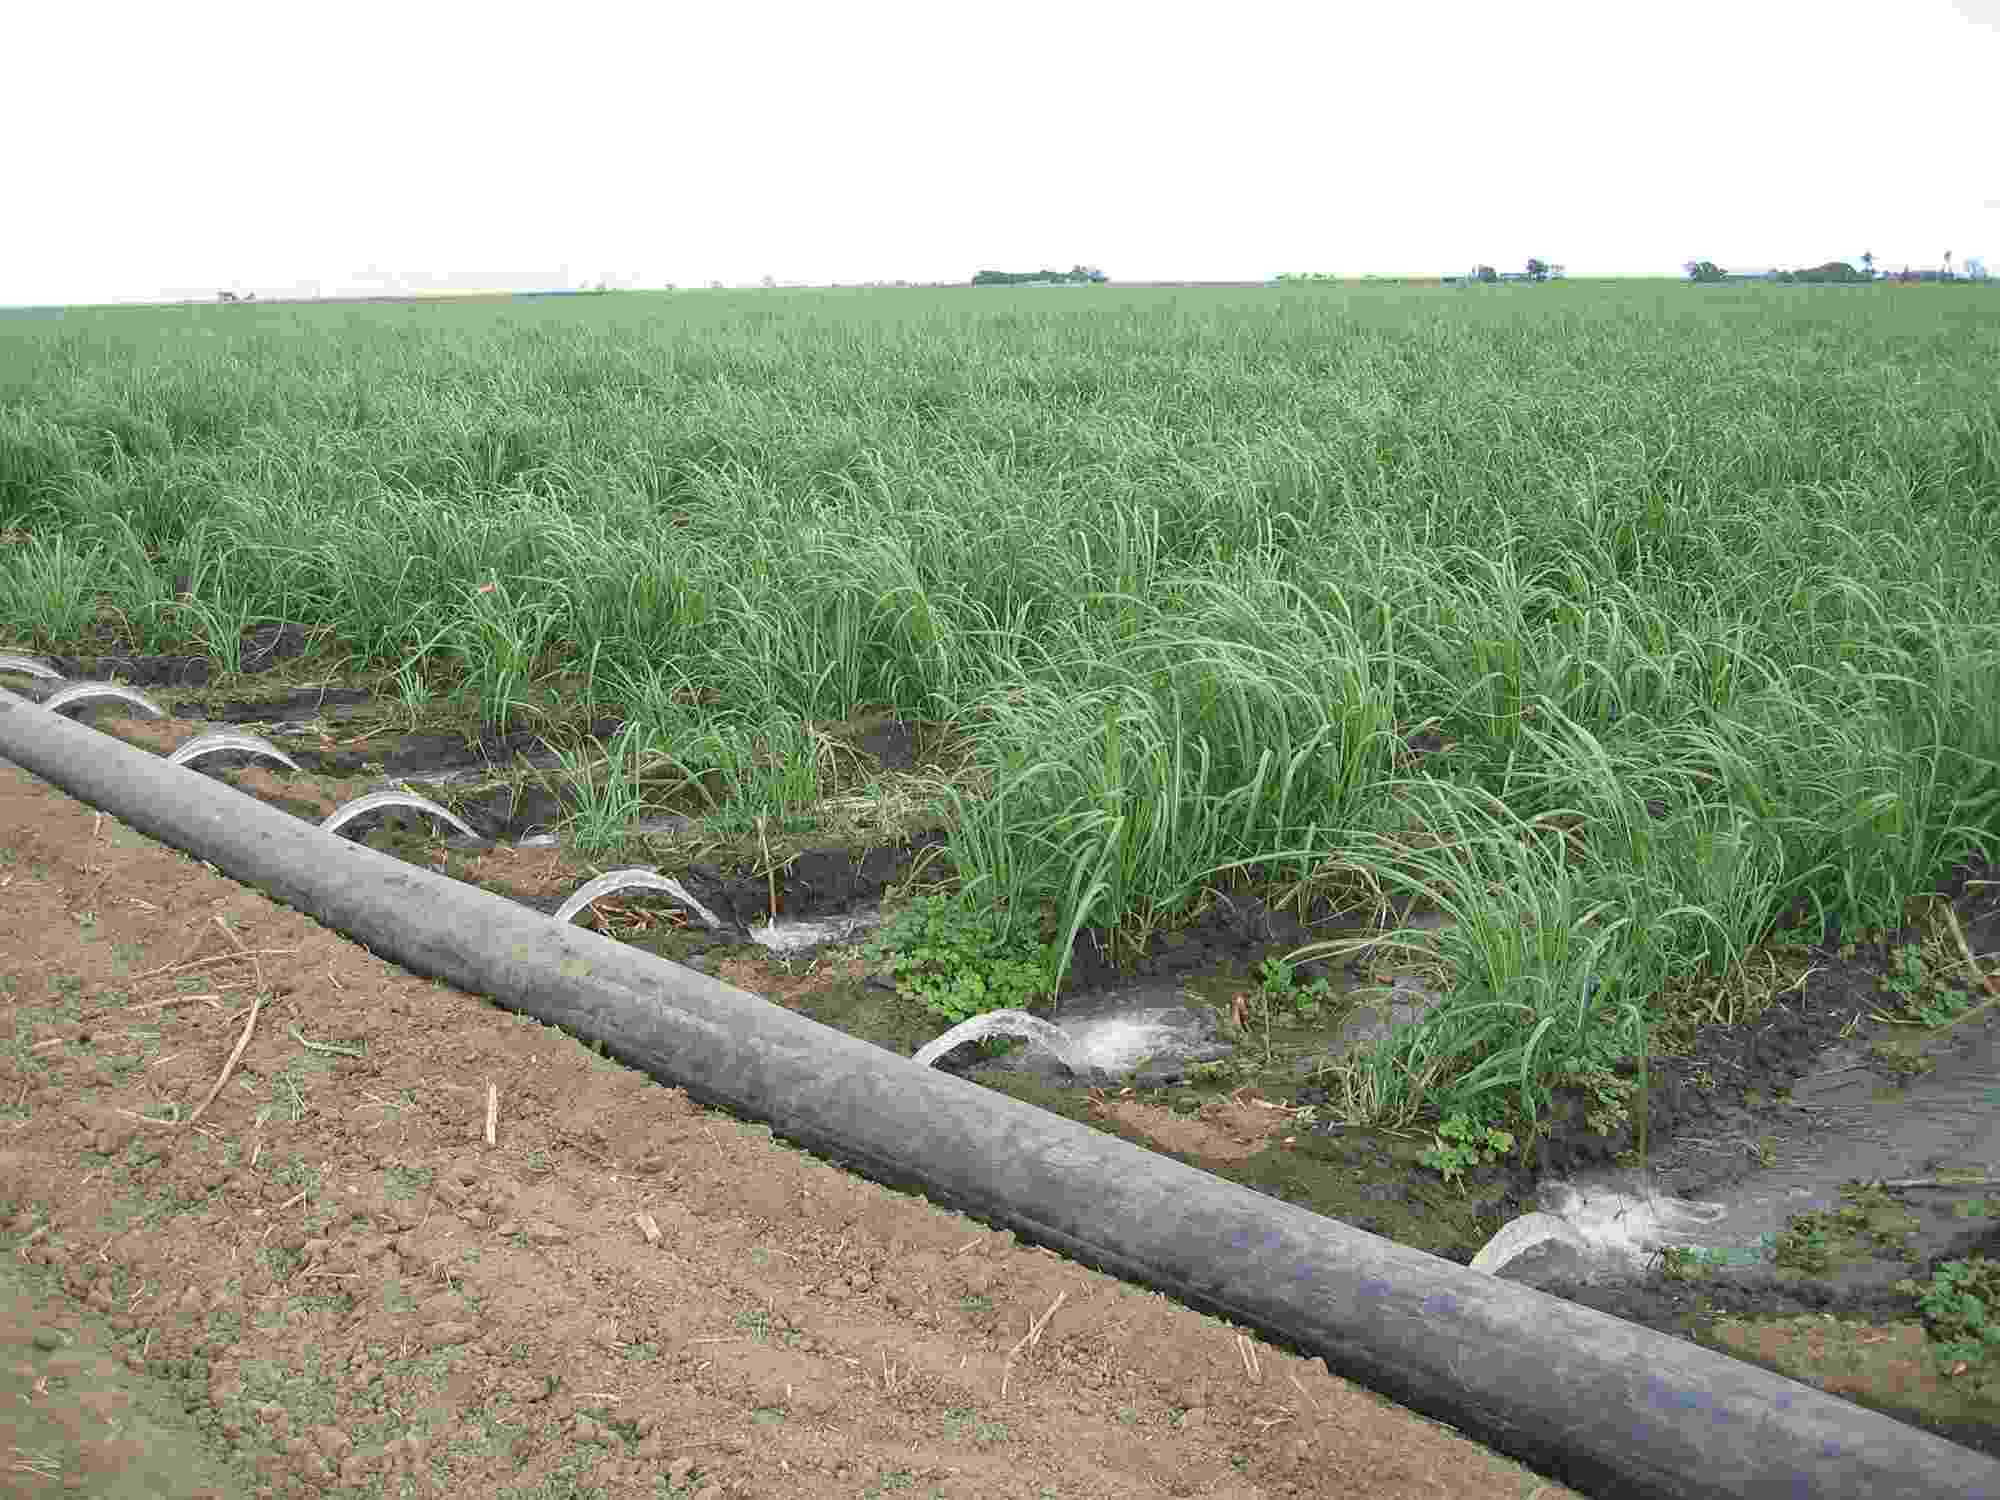 A hydroflume delivers small streams of water directly to root channels of young sugar crop plants